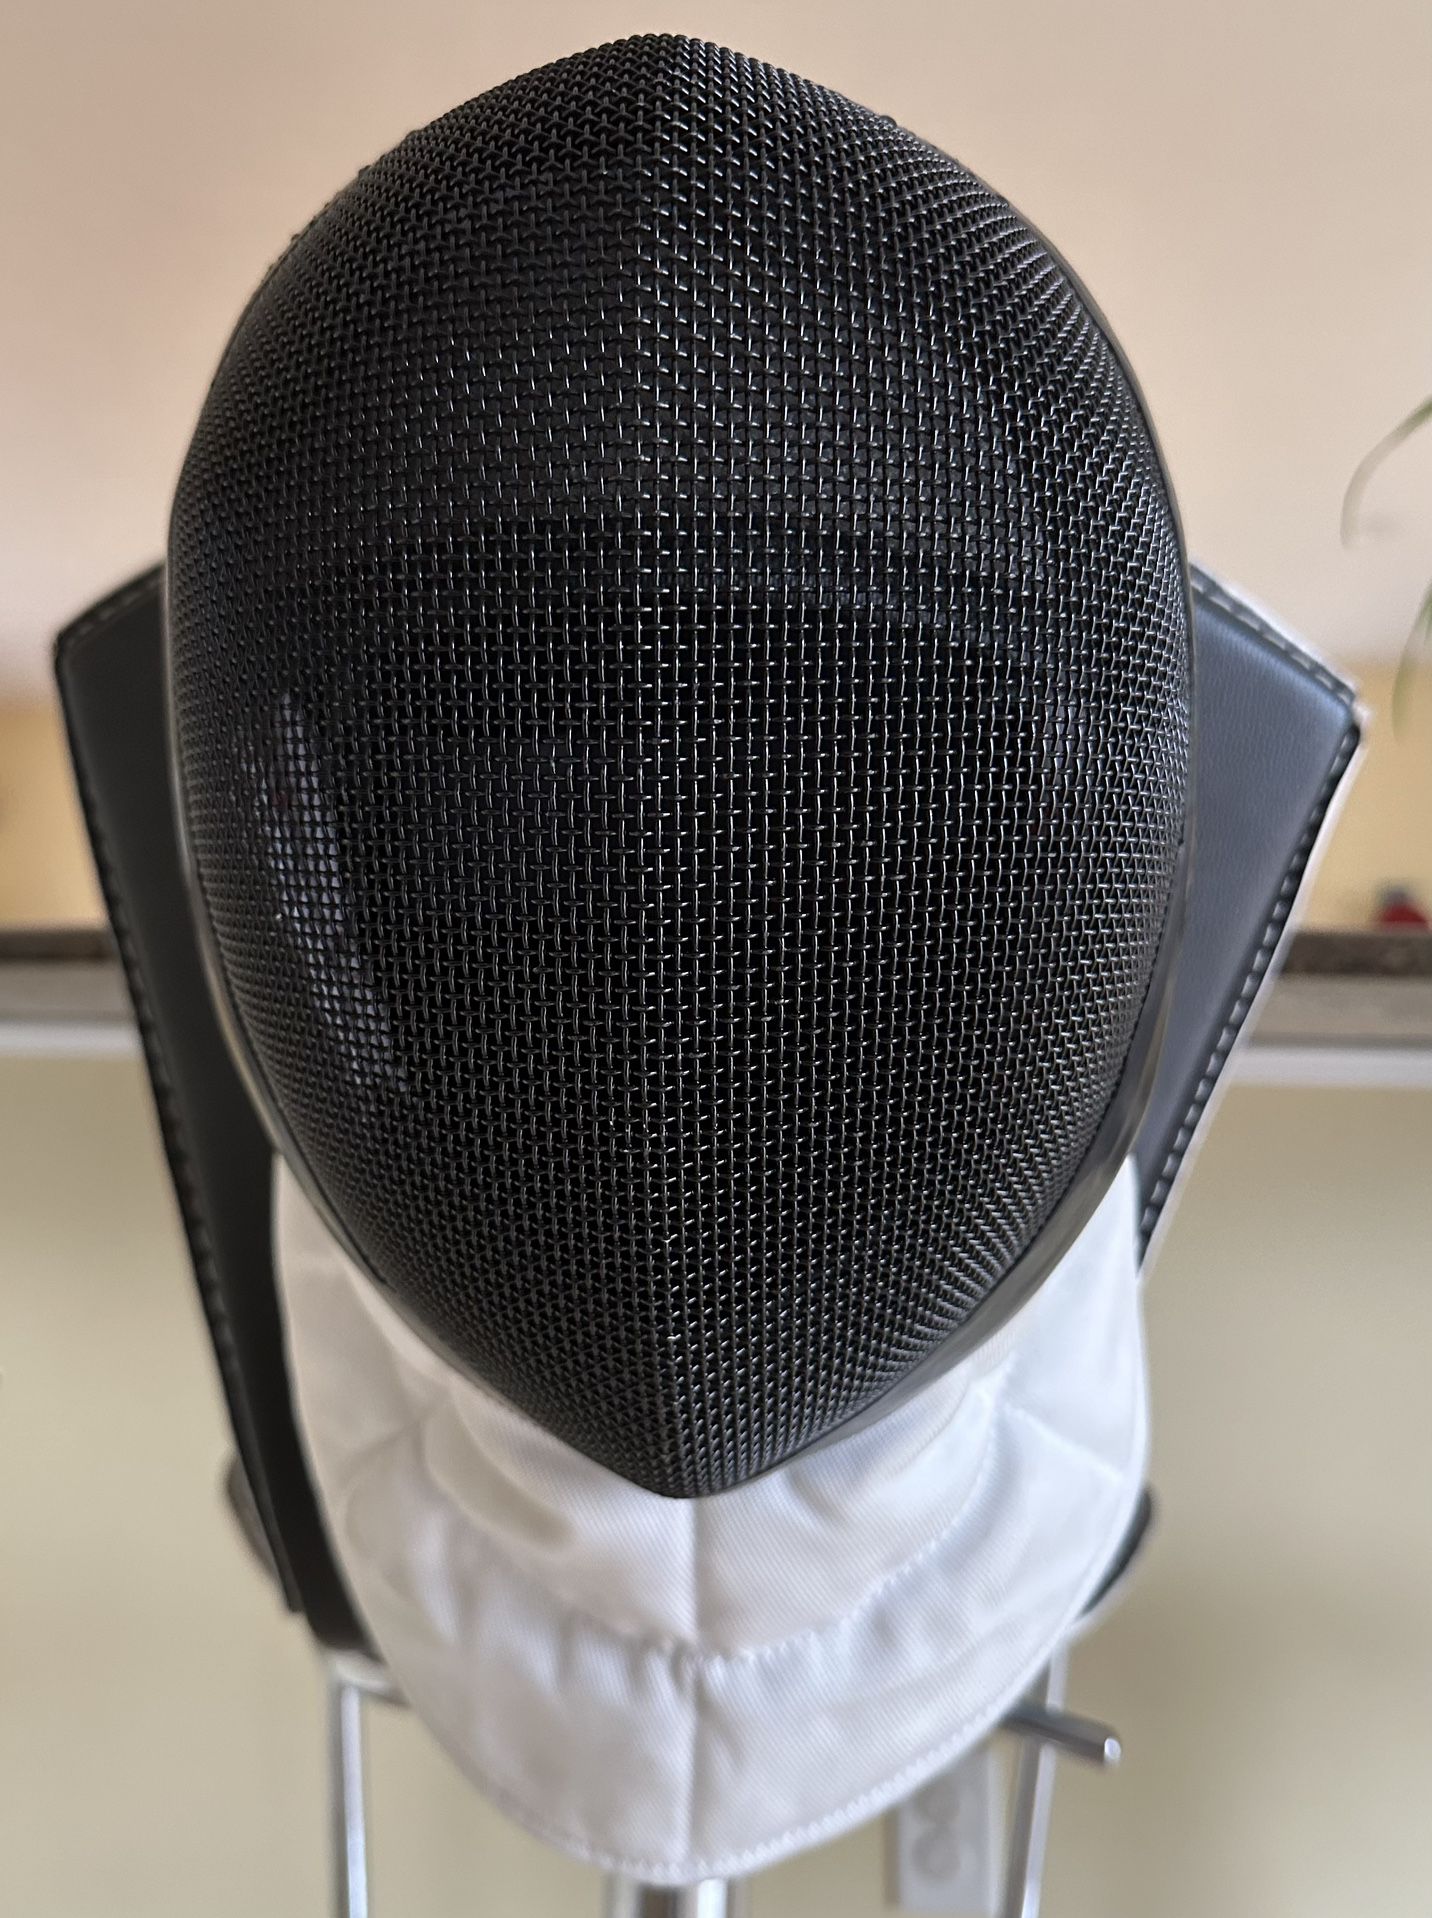 Absolute Fencing Epee CE Leve I 350 N Mask Size M